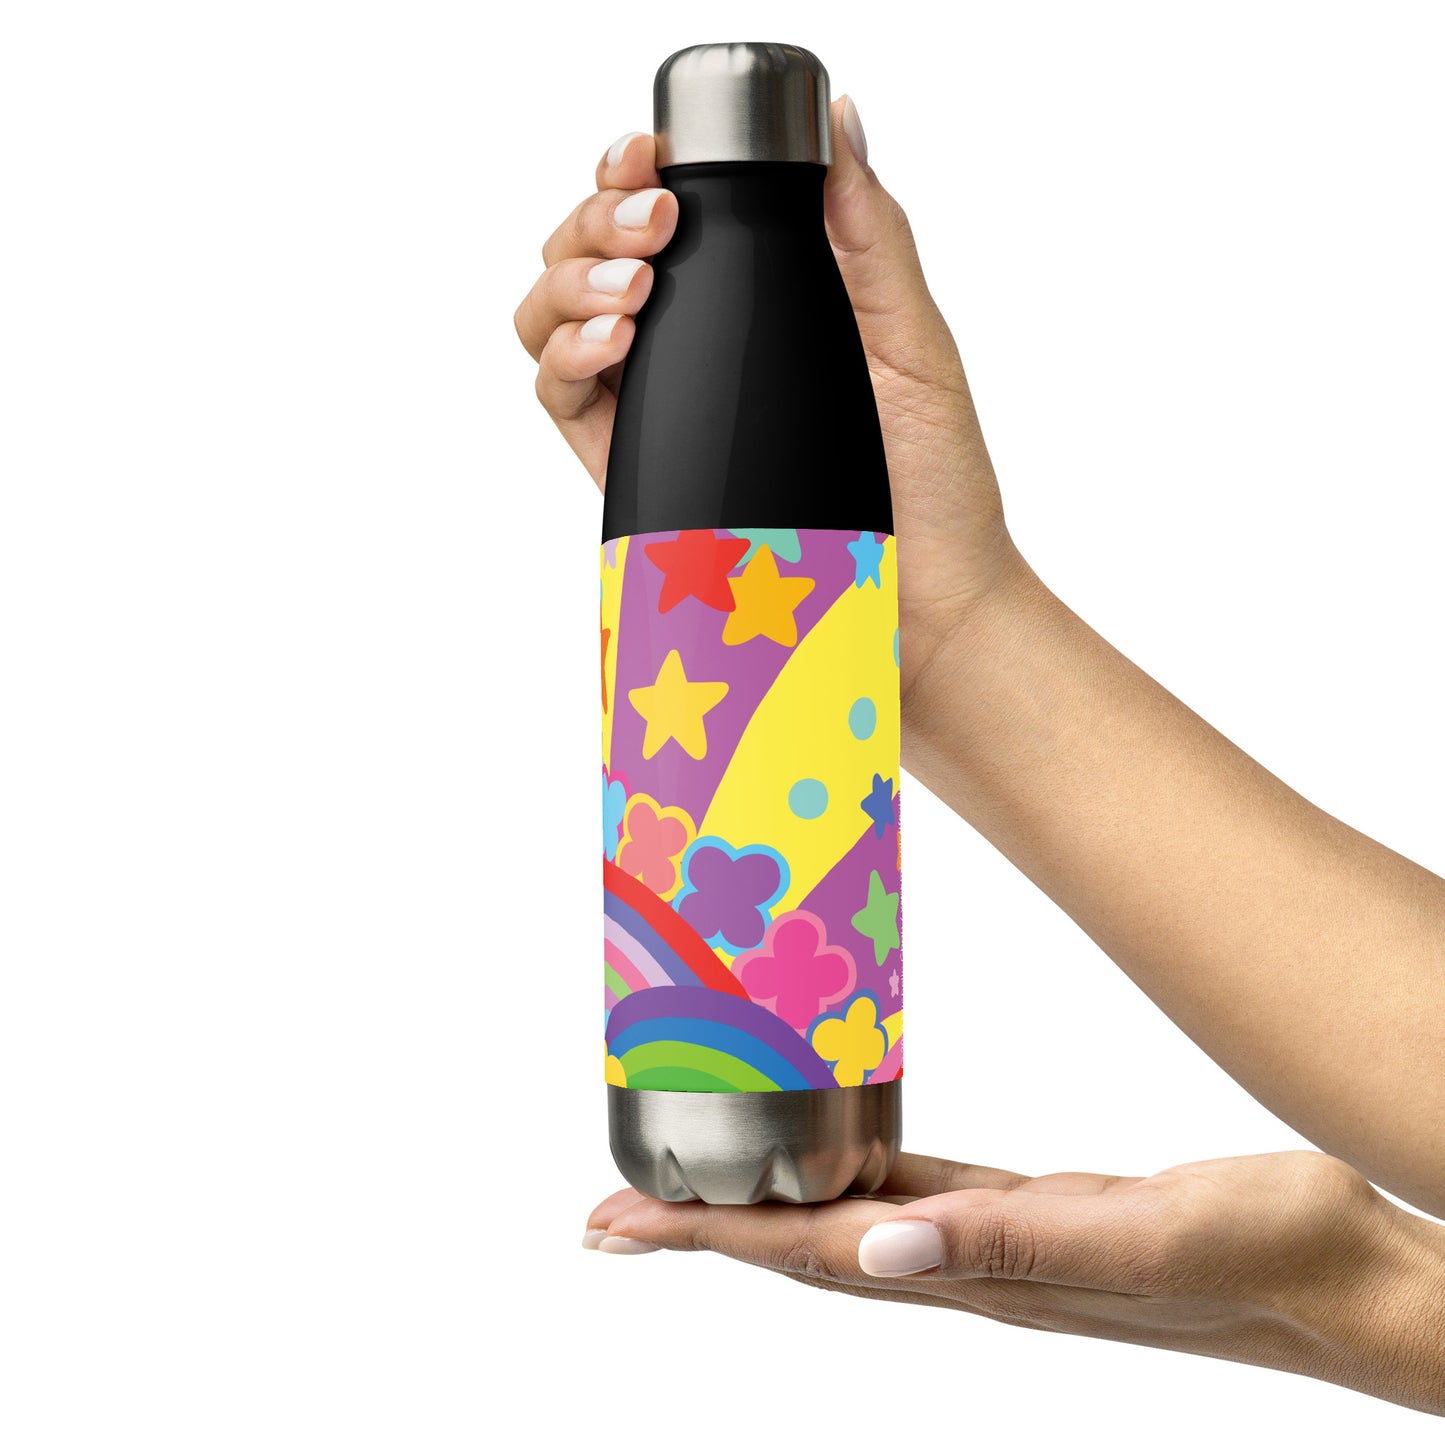 "Optimism Blossoms" Rainbow Star Stainless Steel Water Bottle